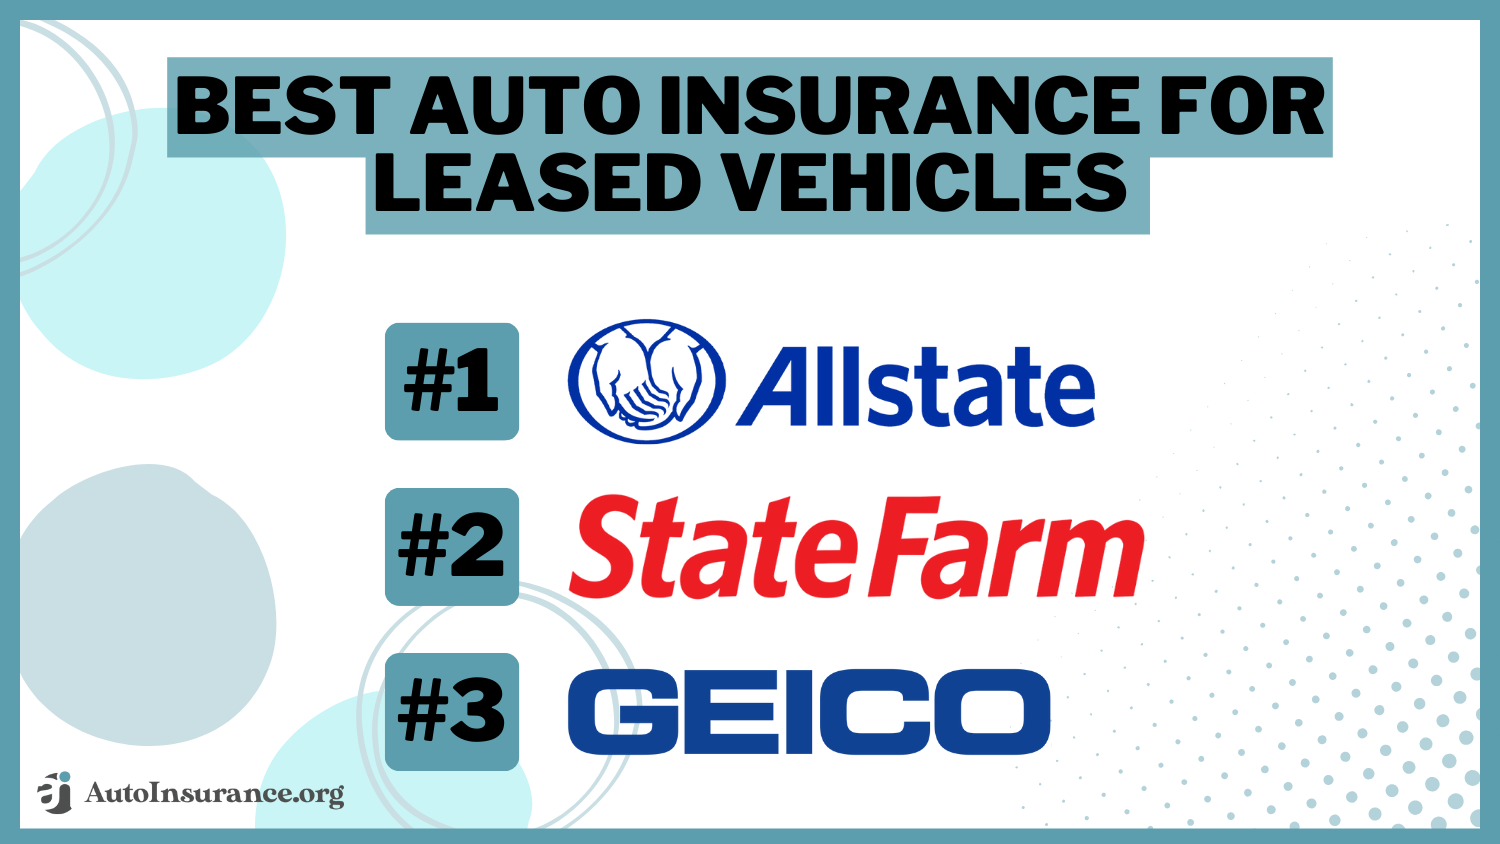 Allstate, State Farm, Geico: Best auto insurance for leased vehicles